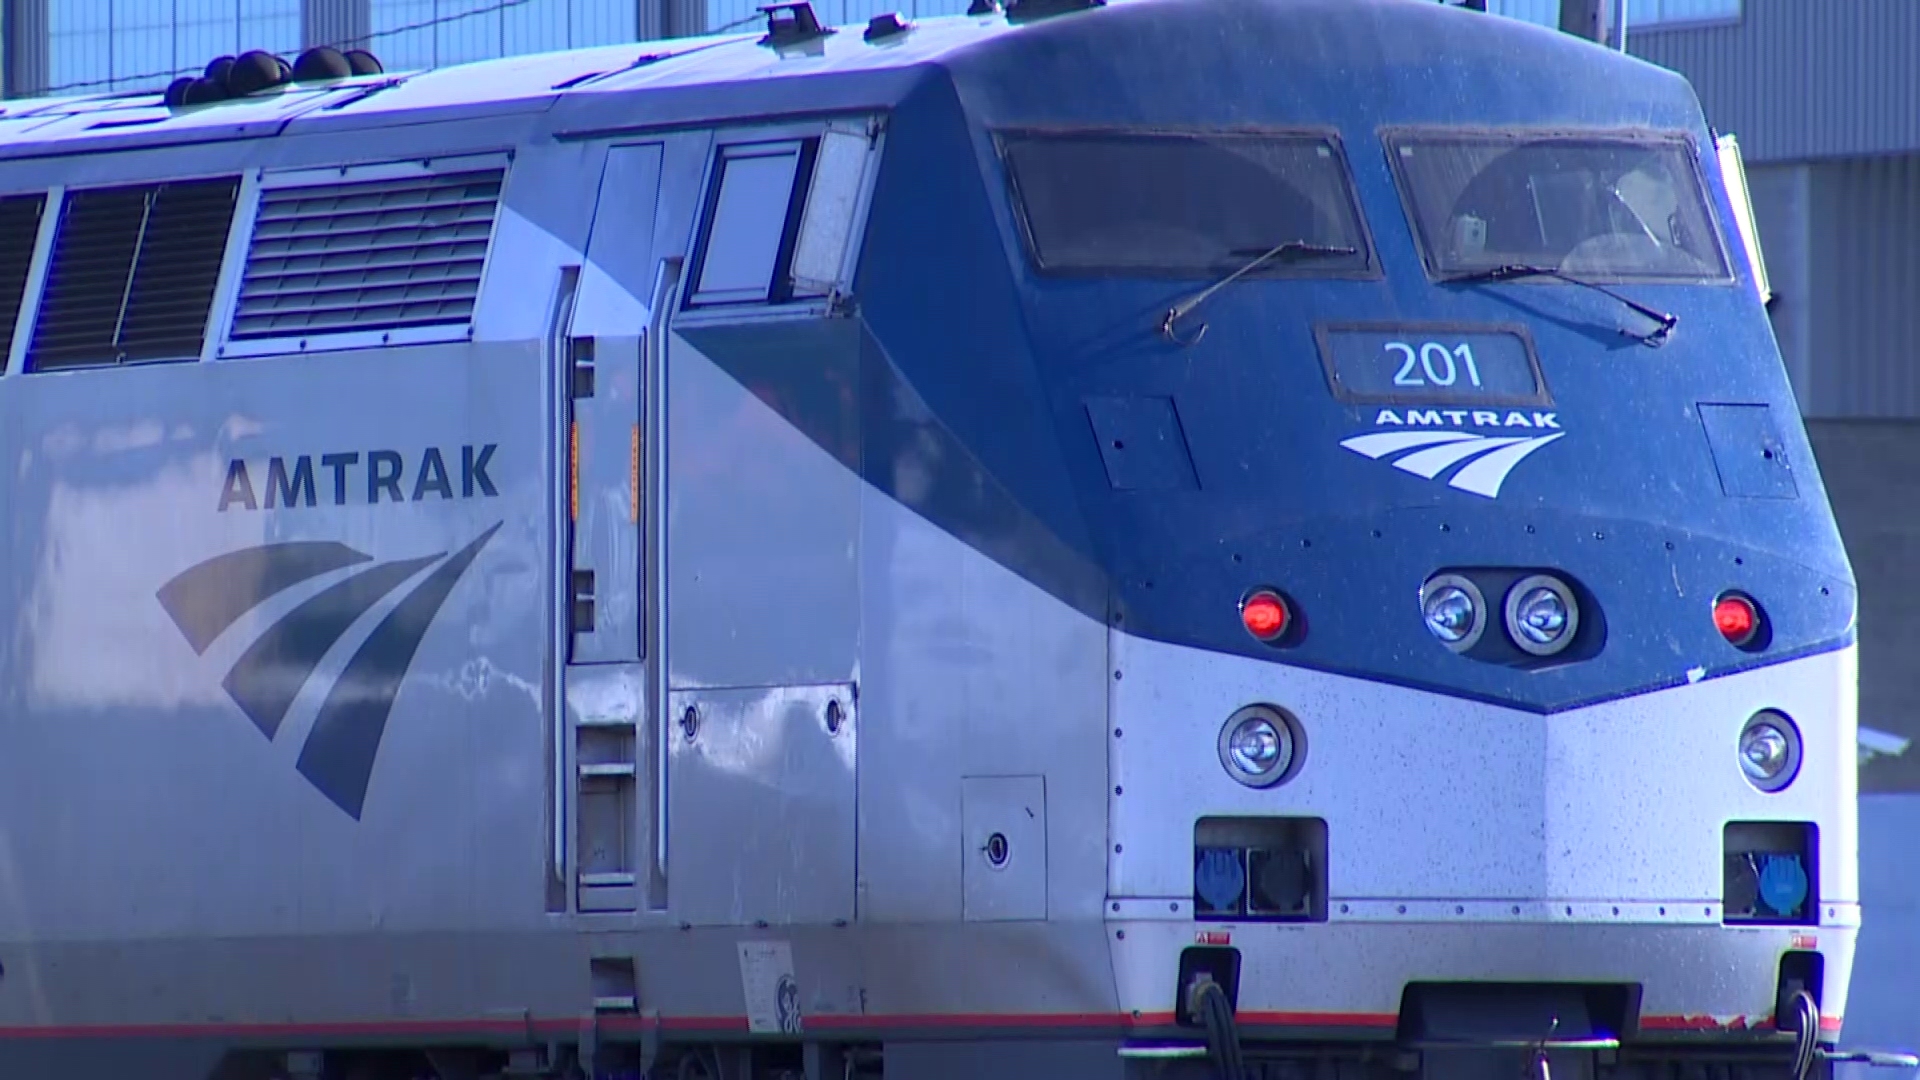 The rail service recently submitted its annual request for funding, which could impact travelers using Amtrak between World Cup host cities Seattle and Vancouver.